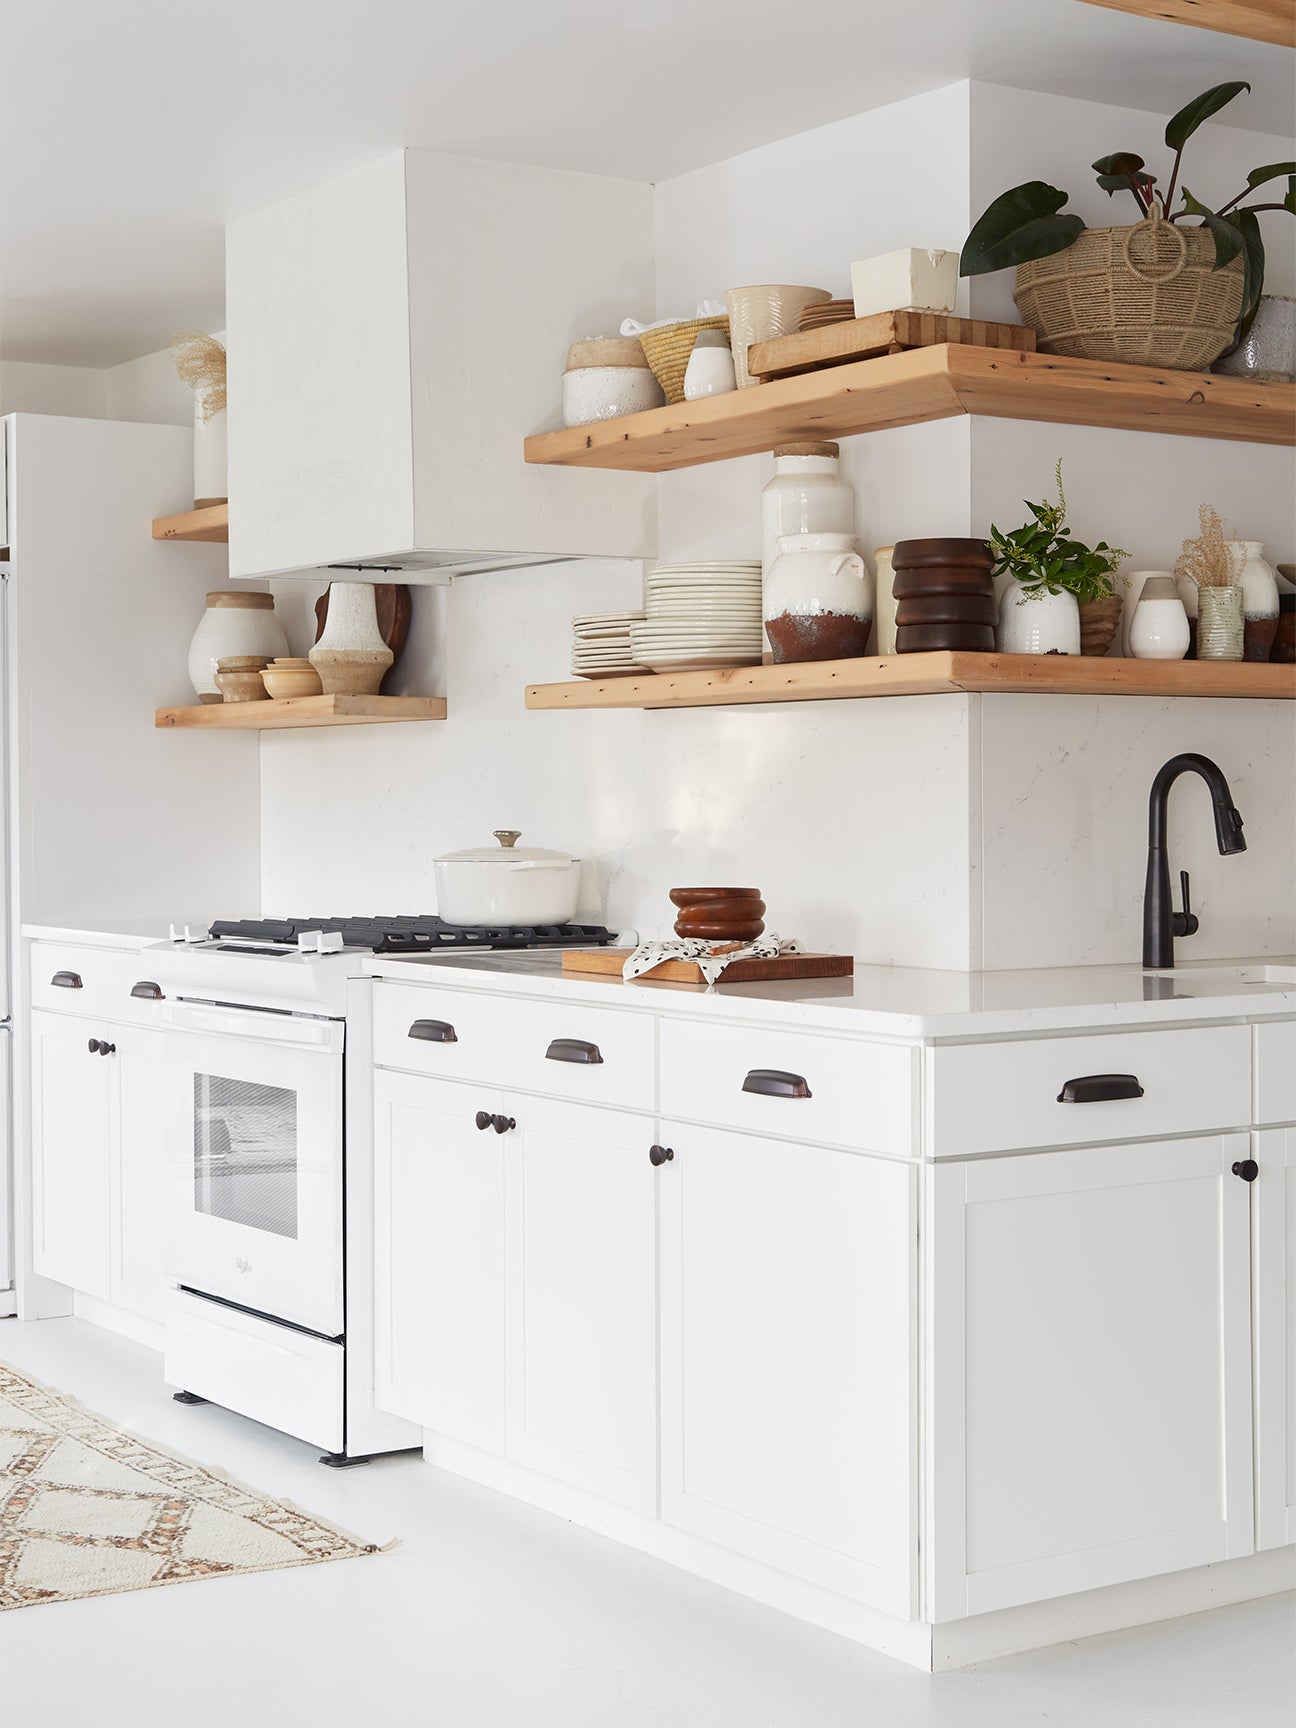 White kitchen with open shelving.